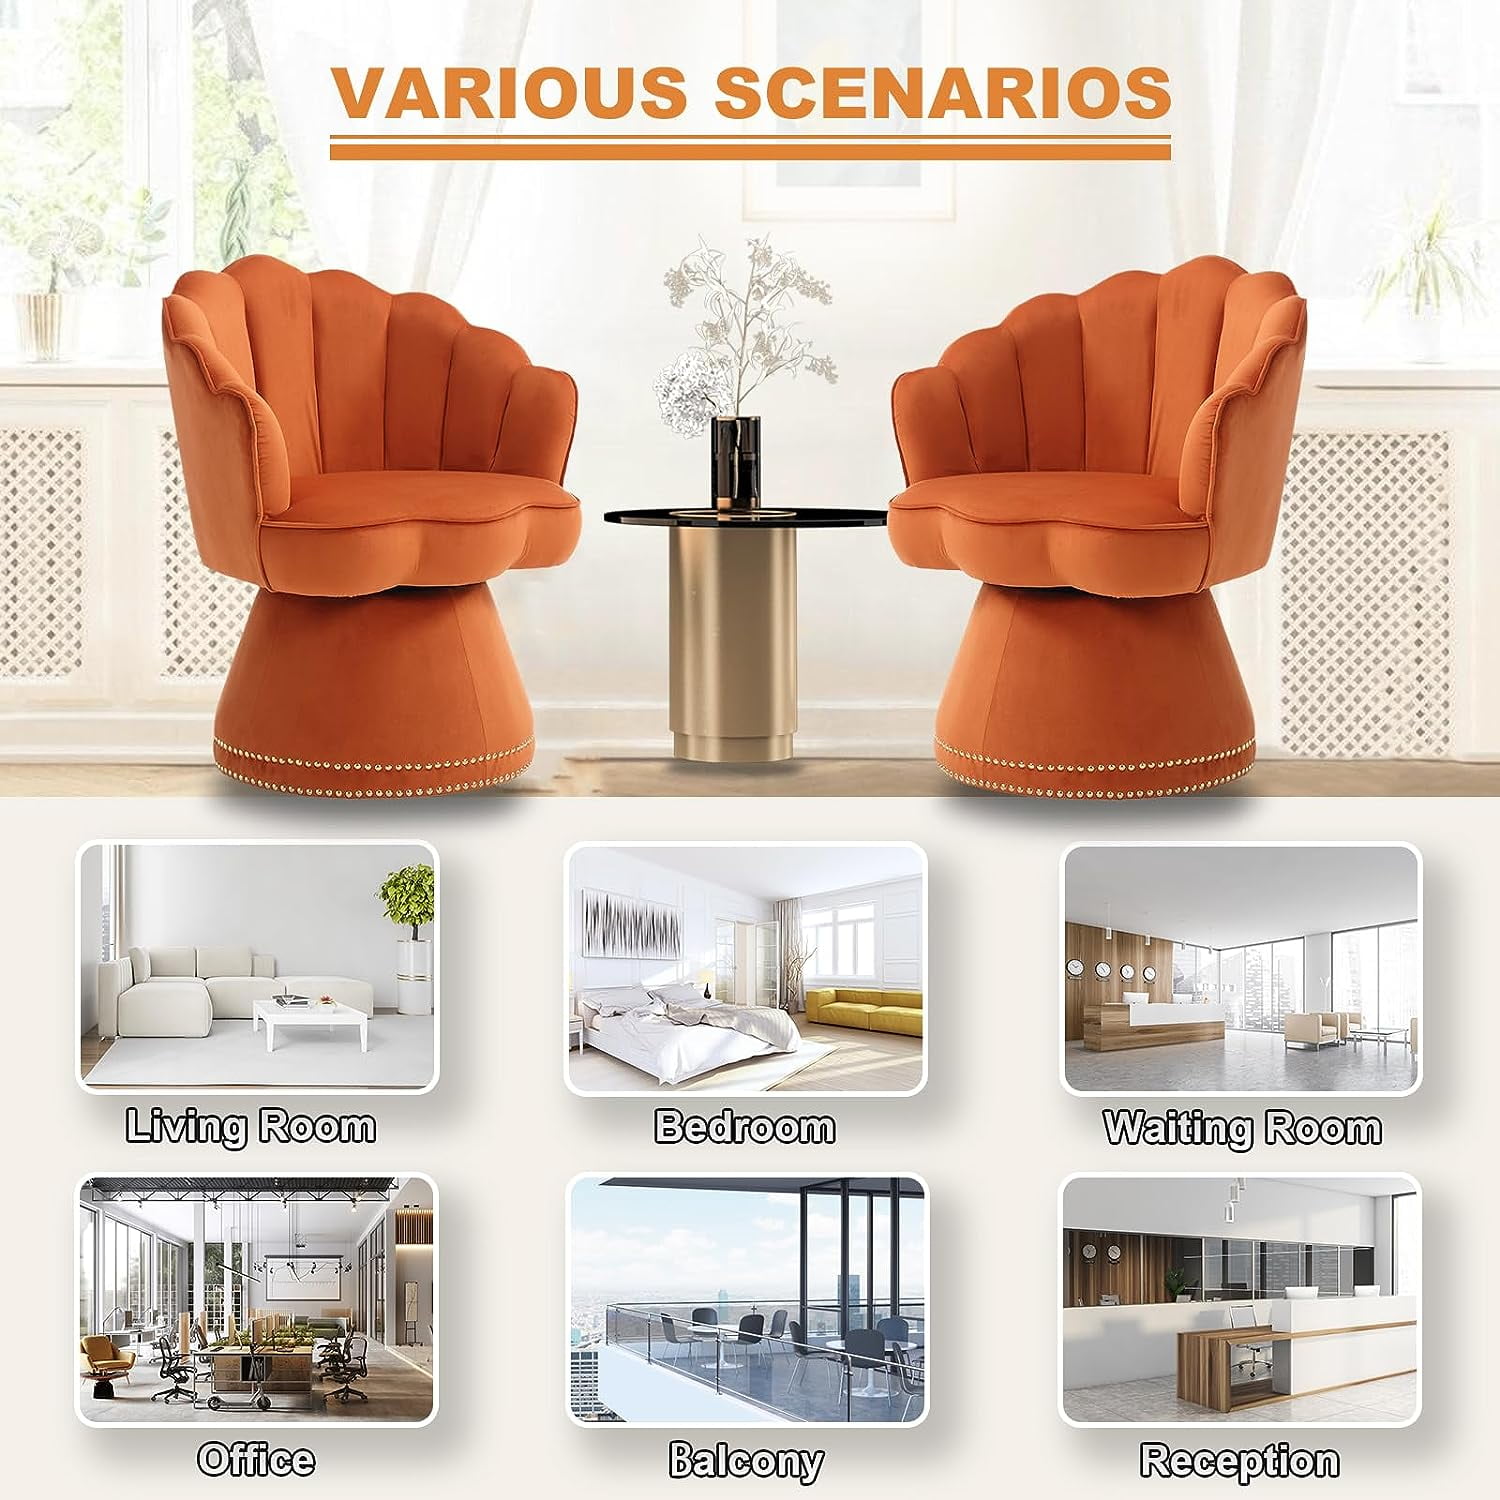 Comfy Chairs For Bedroom - VisualHunt